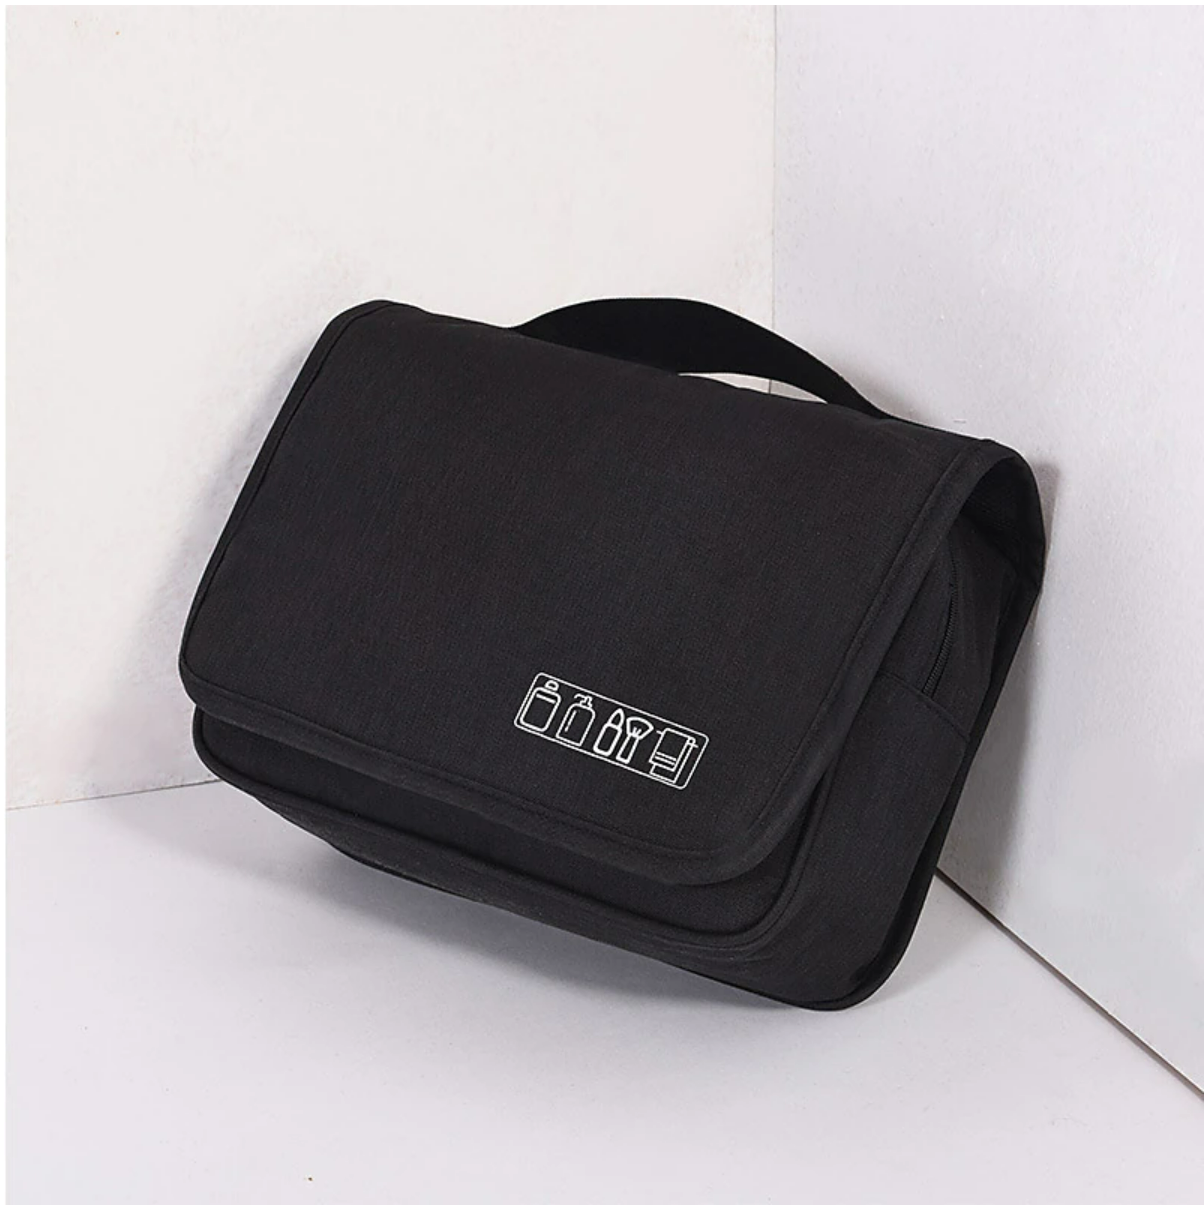 Portable Cosmetic Bag Cationic Dry and Wet Separation Storage Bag Travel Bag Hand Hook Wash Bag